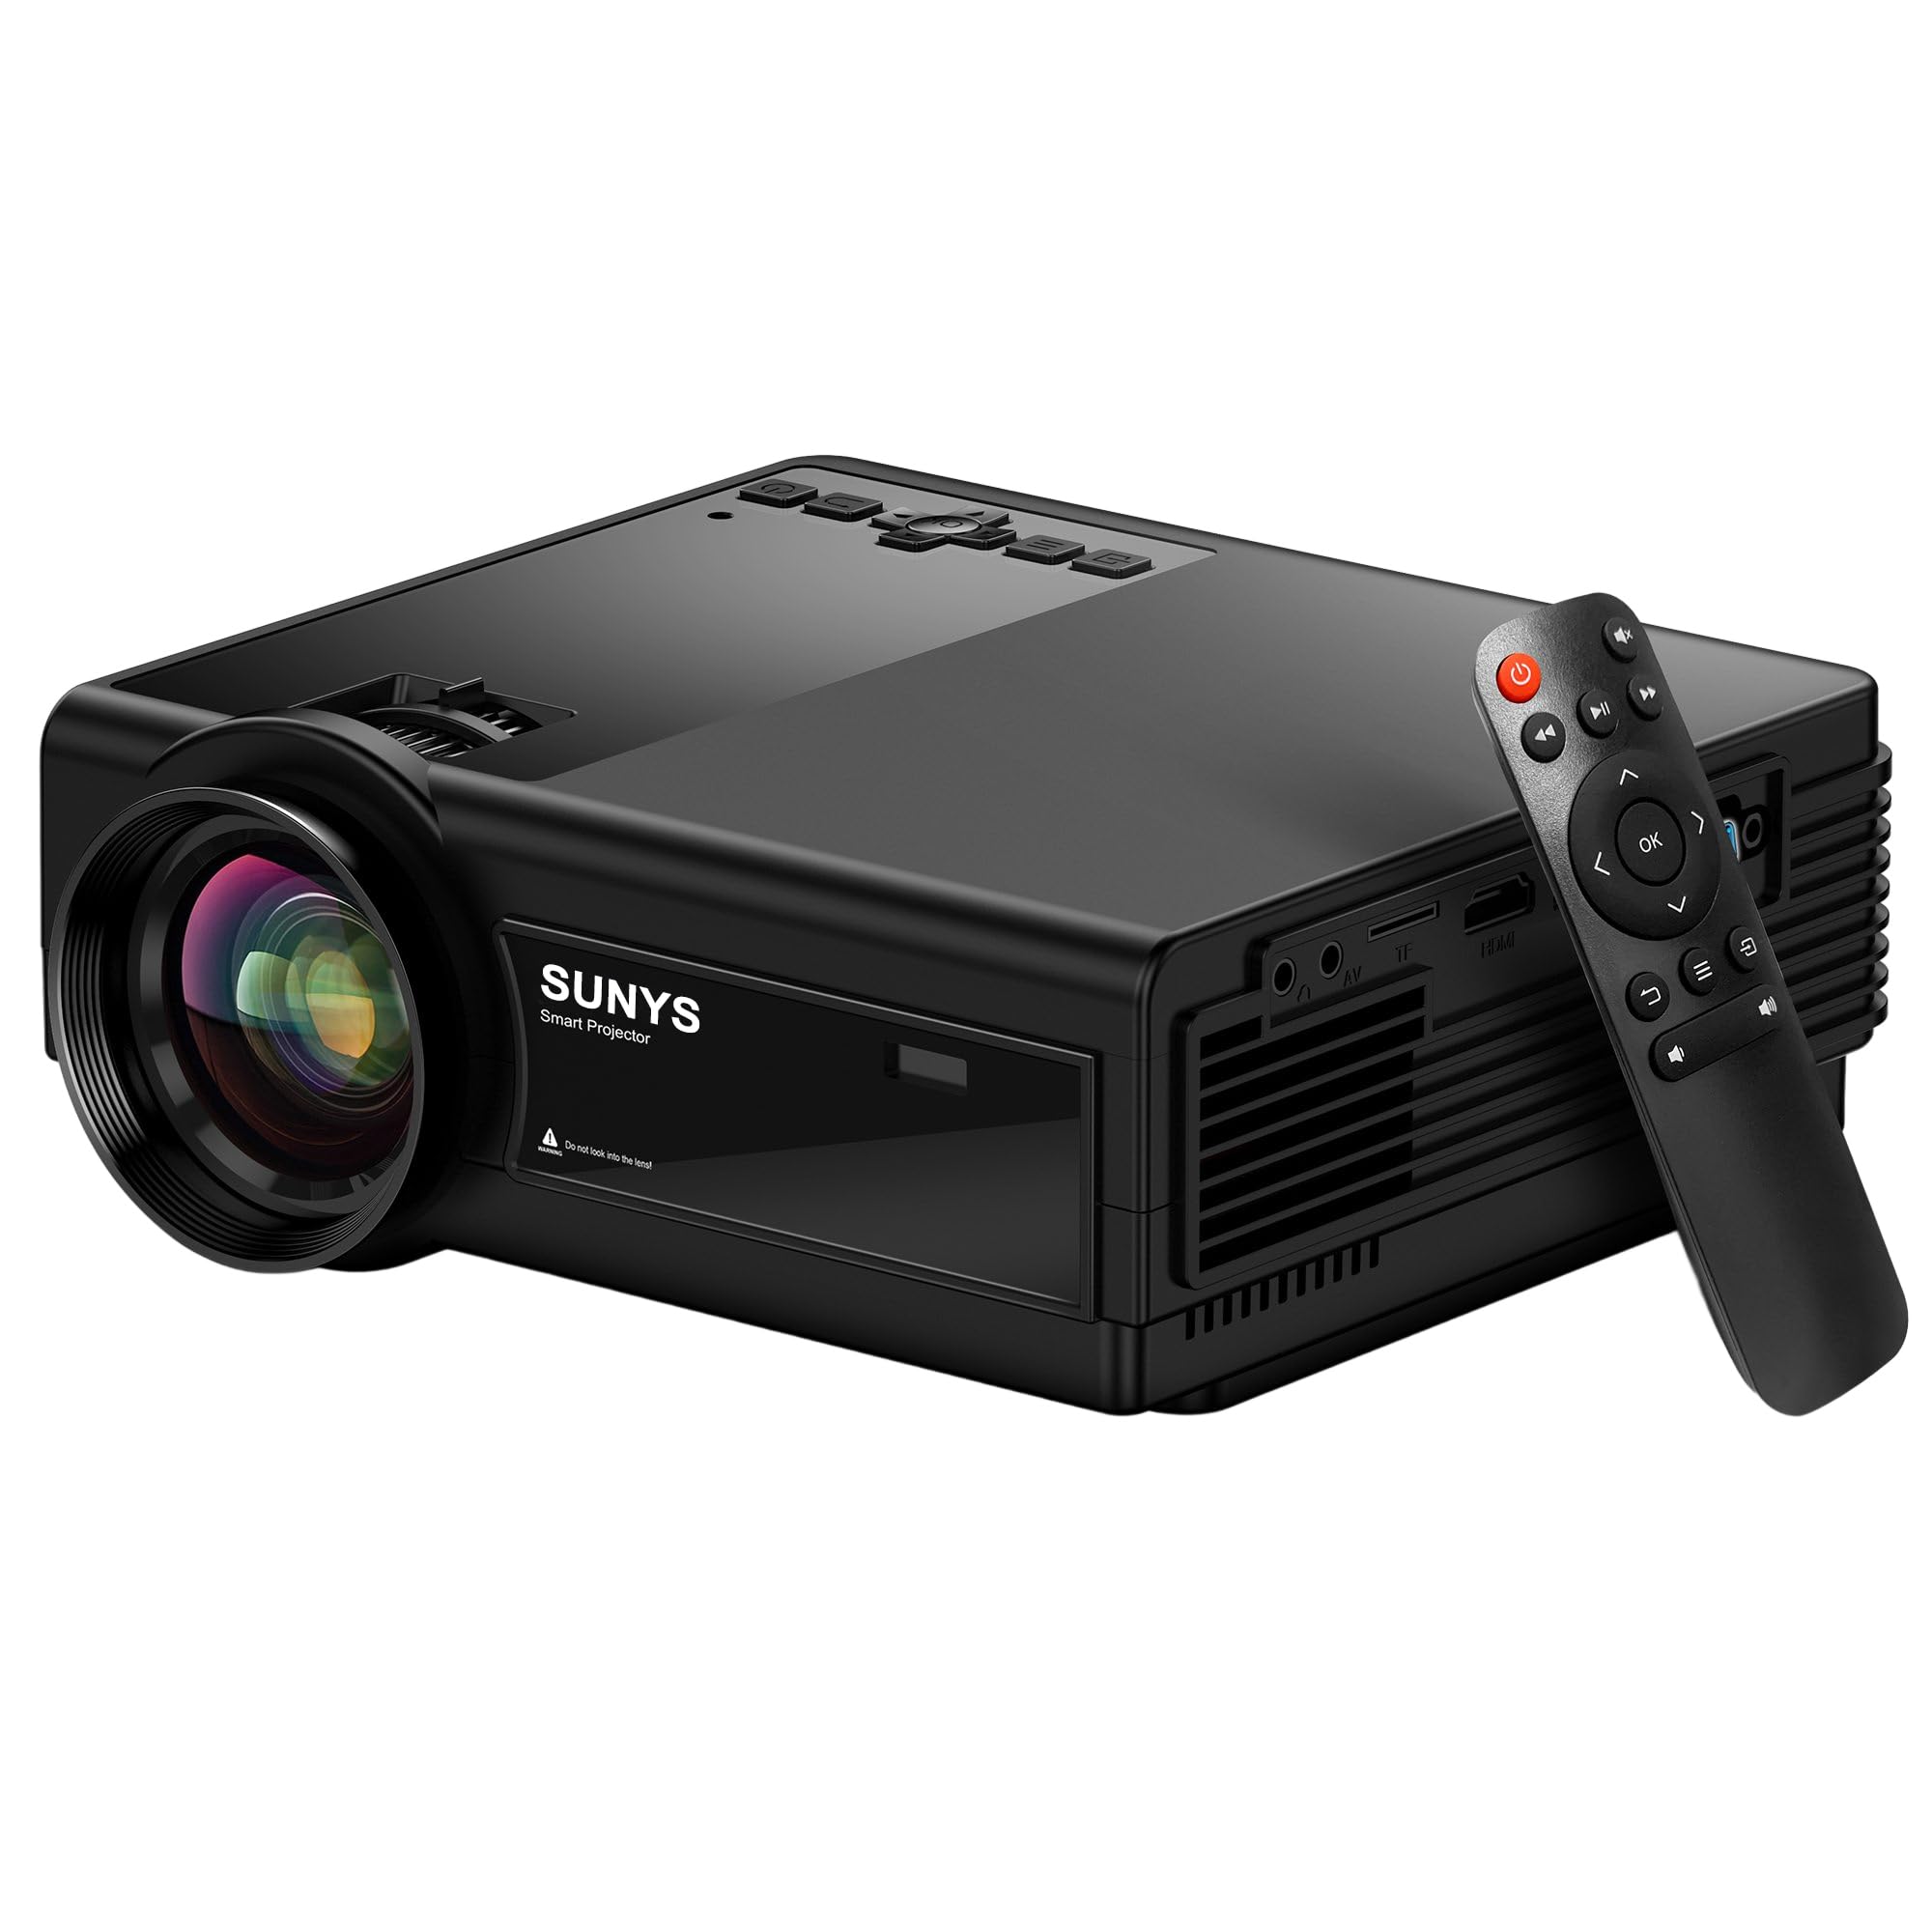 Sunys Projector with WiFi and Bluetooth, 5G WiFi Native 1080P 12000L Home Theater Projector 4K Supported, Phone Projector for iPhone, with Built-in Speaker/HDMI/USB/PC/TV Stick/Switch Supported